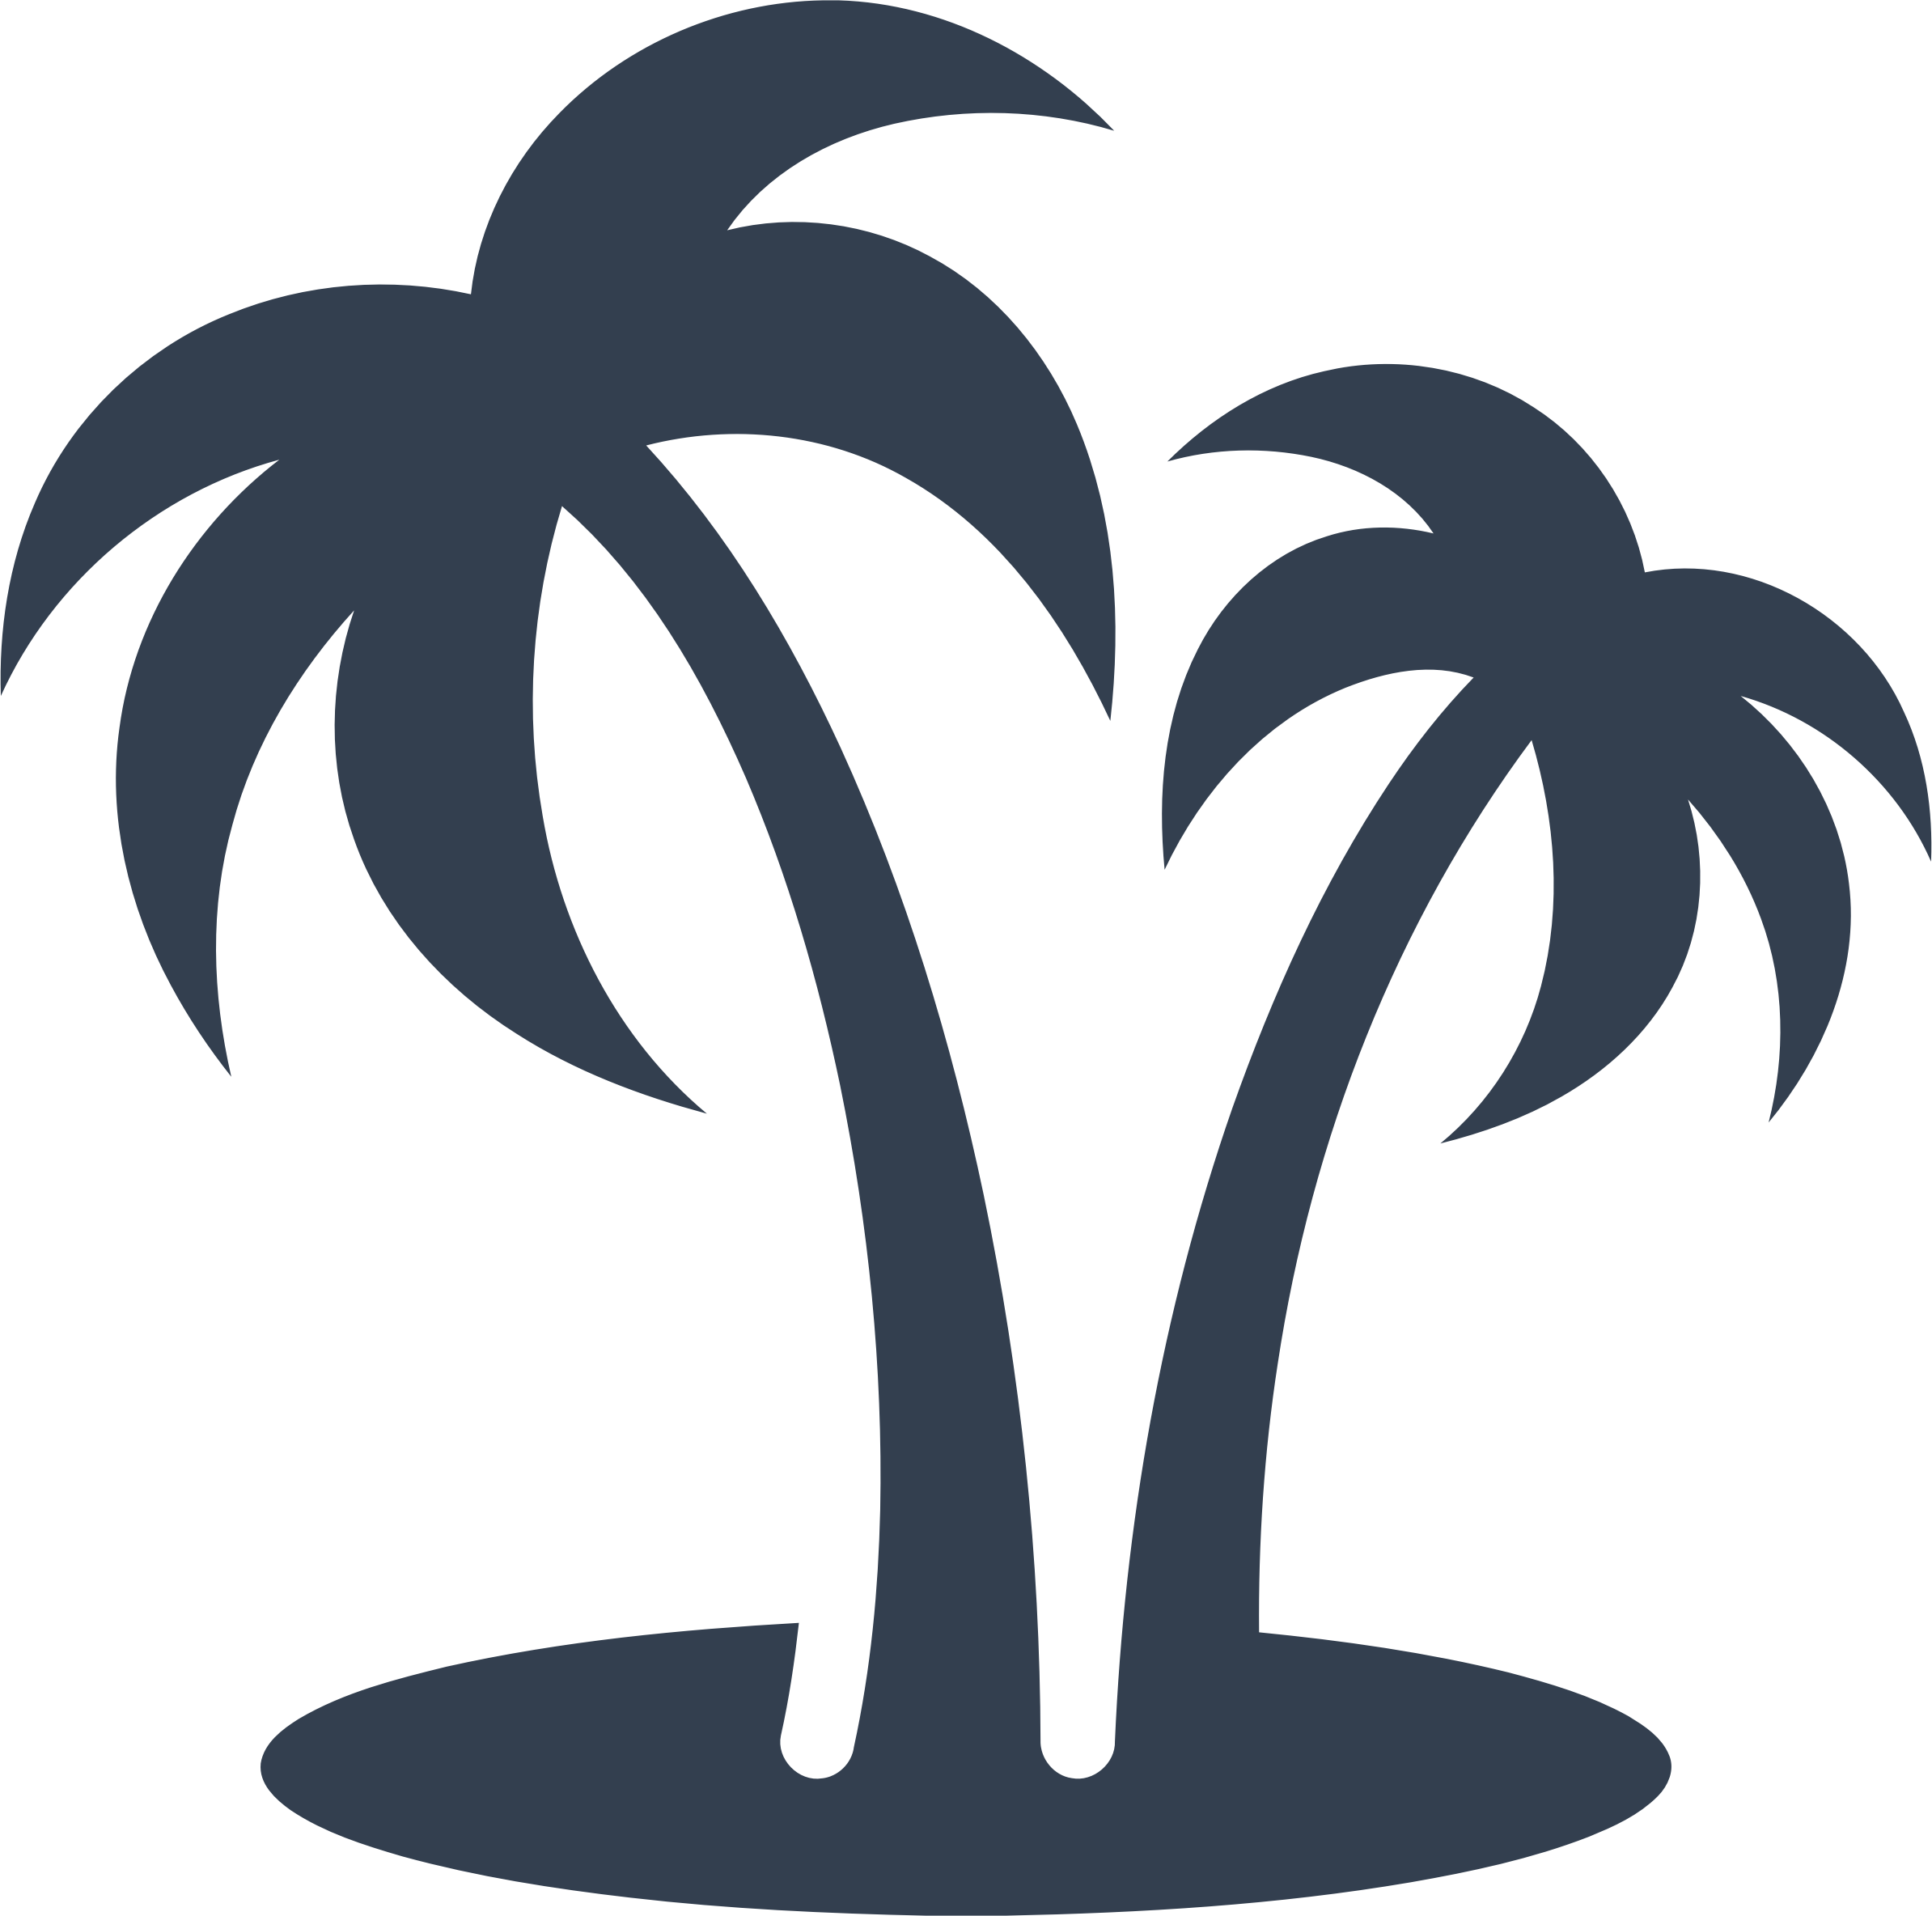 A Group Of Palm Trees